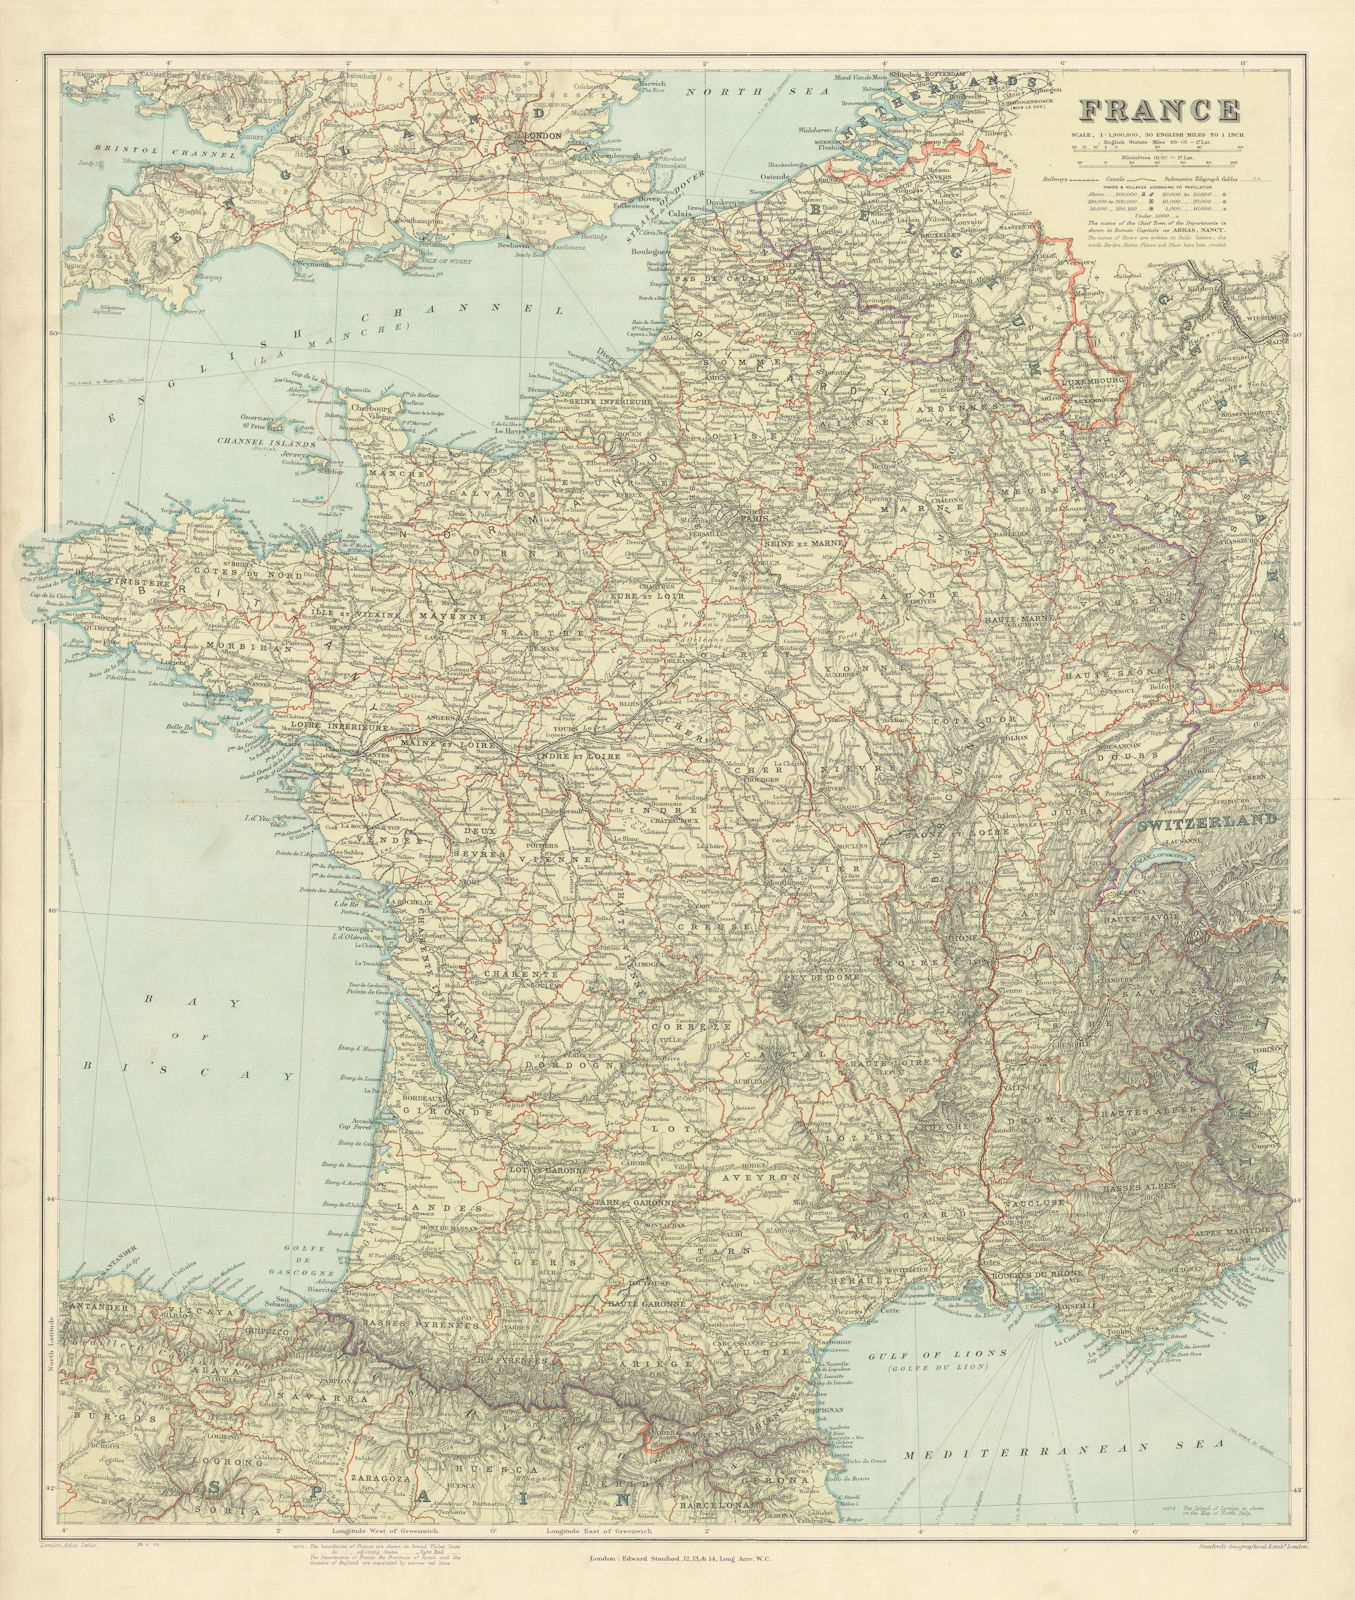 France in departements without Alsace Lorraine. Large 65x54cm. STANFORD 1904 map